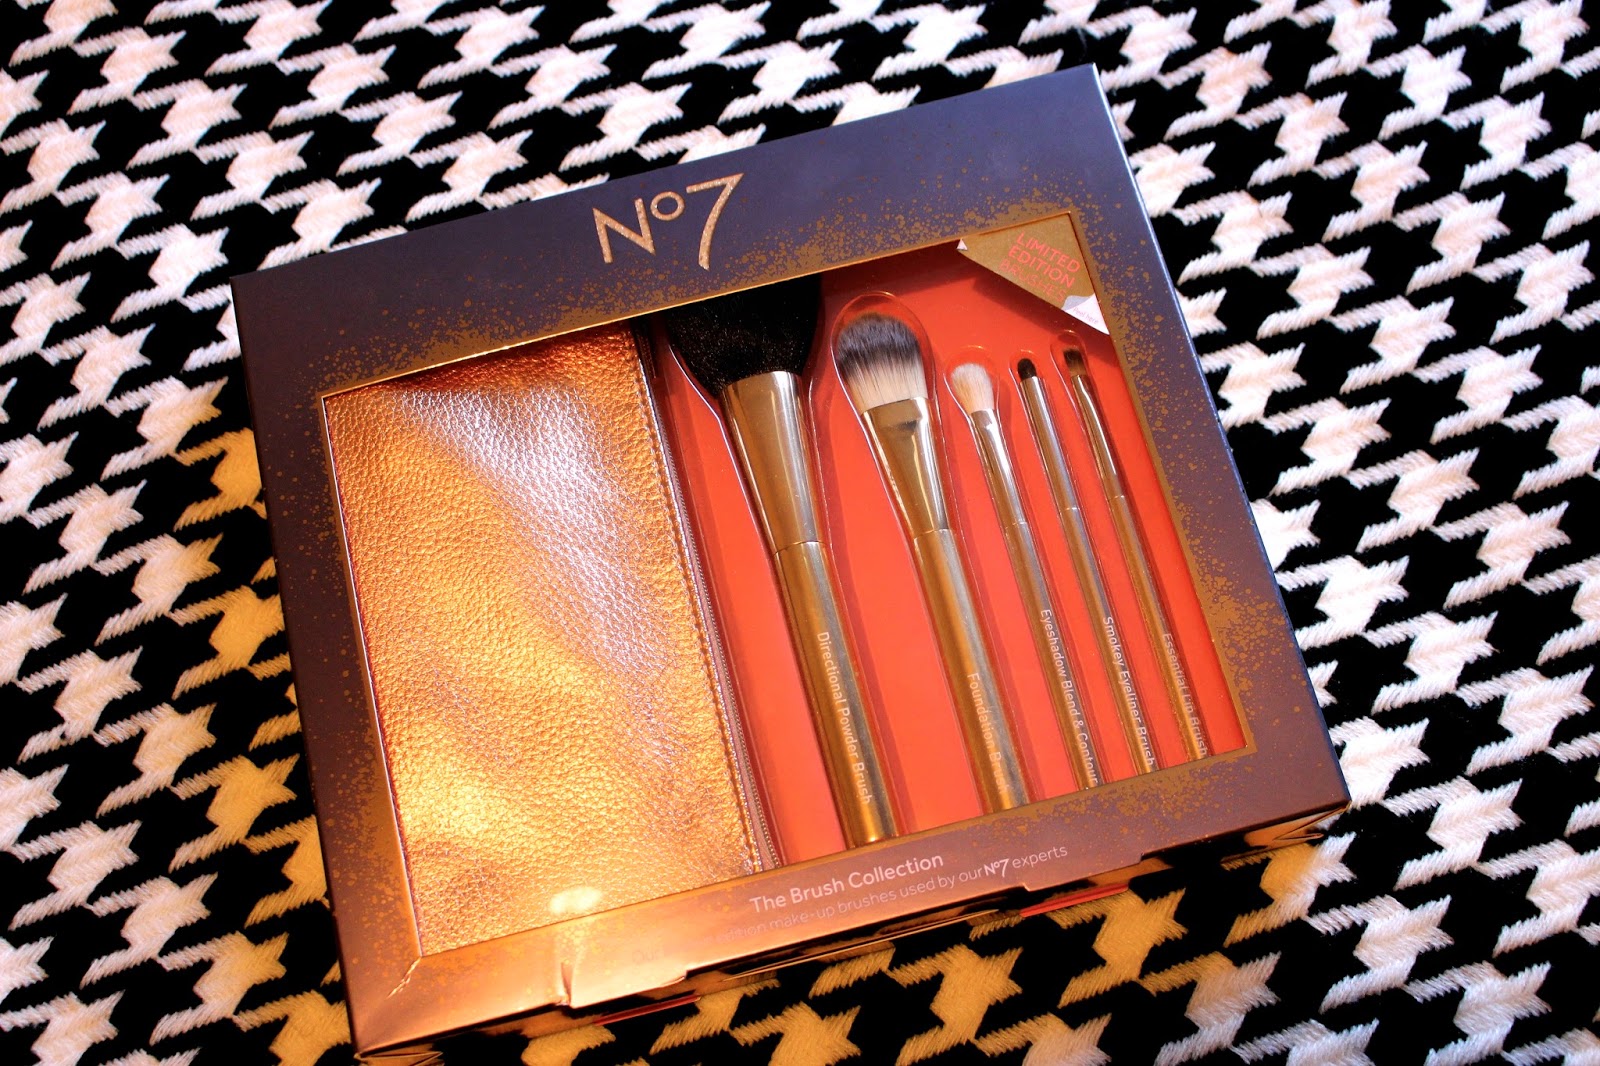 No7 Brush Collection